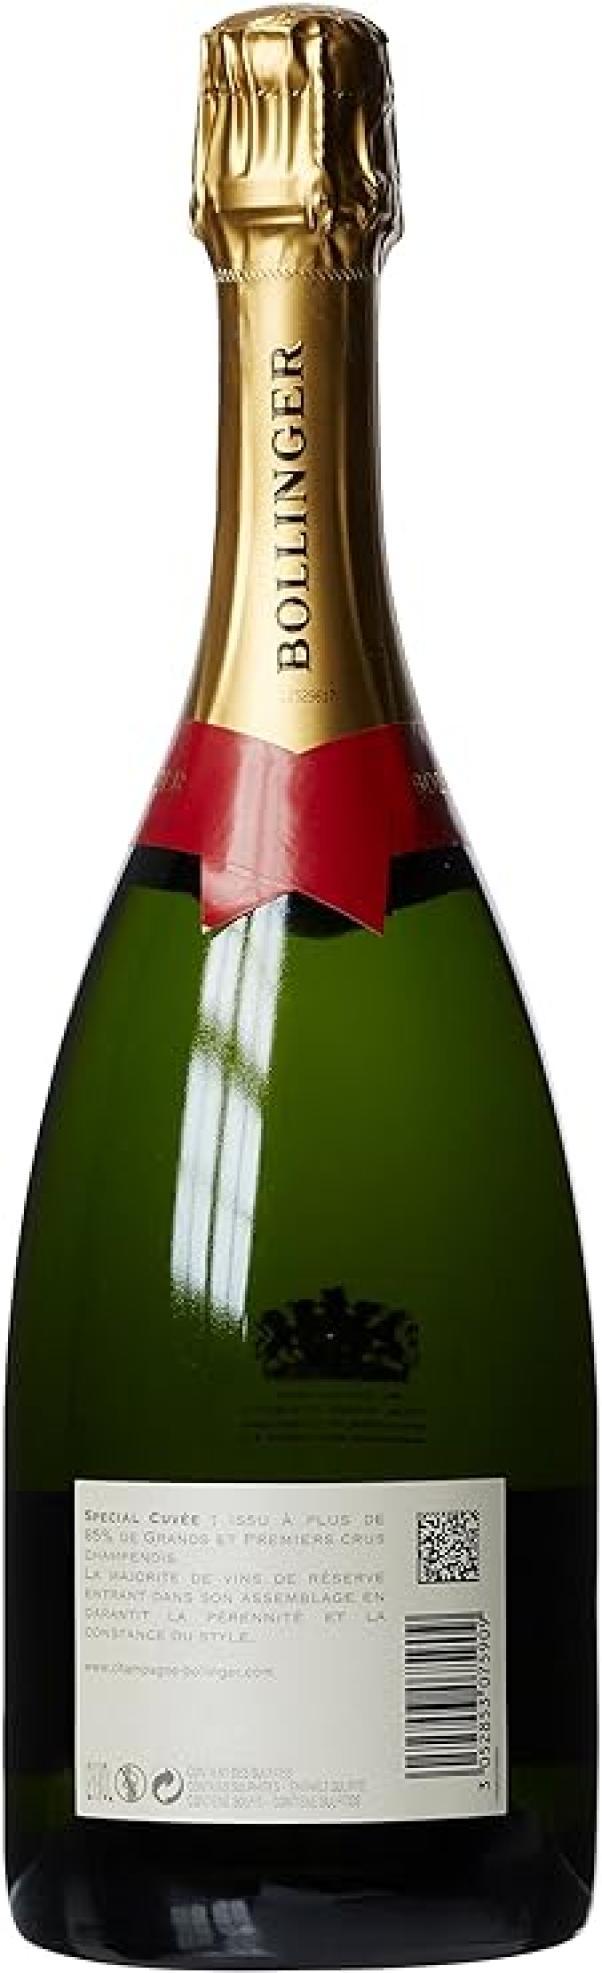 champagne-special-cuvee-brut-bollinger-75-cl-2